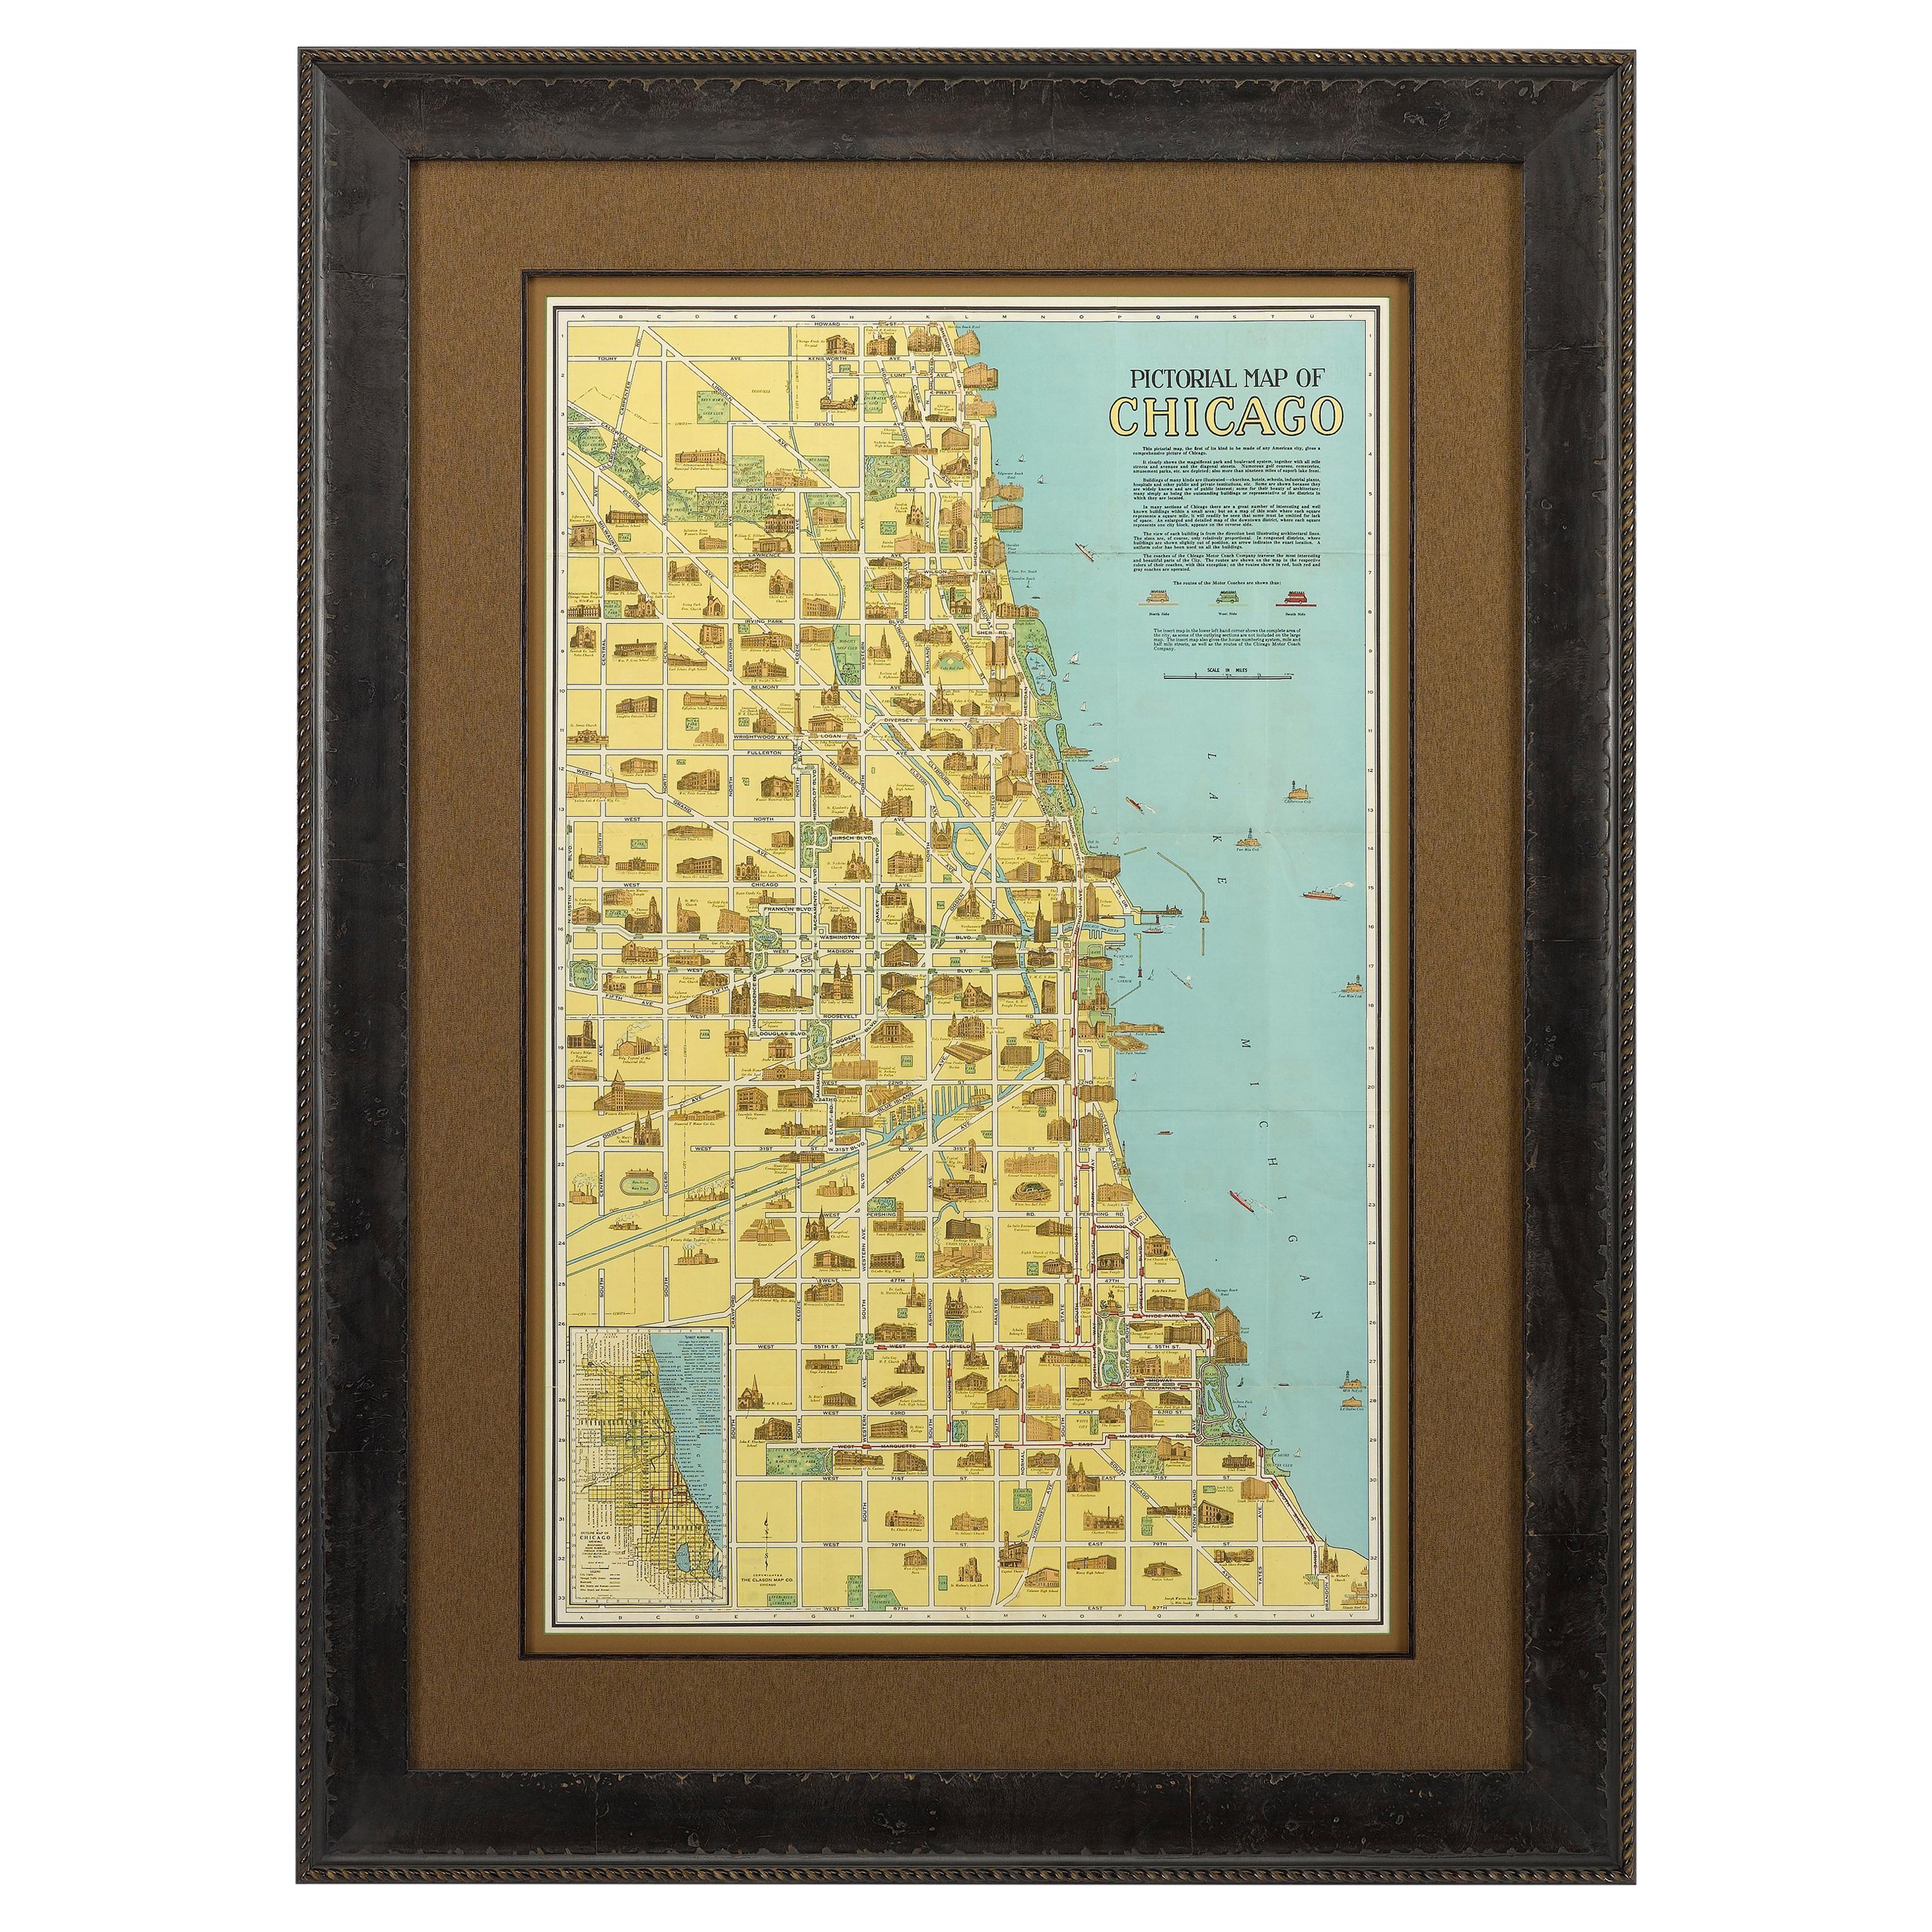 Pictorial Map of Chicago, circa 1926